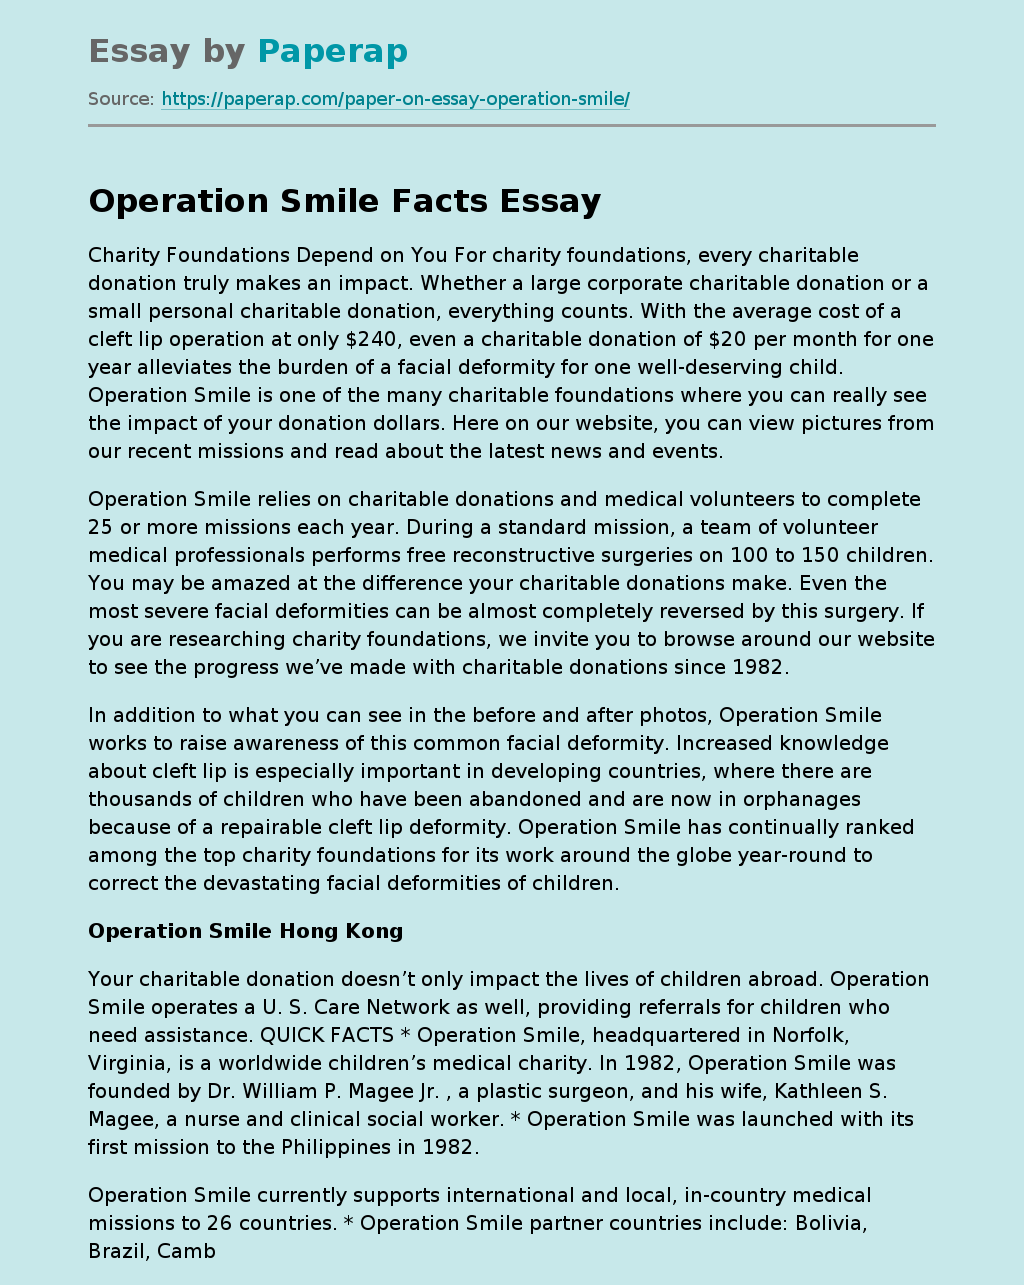 Operation Smile Facts